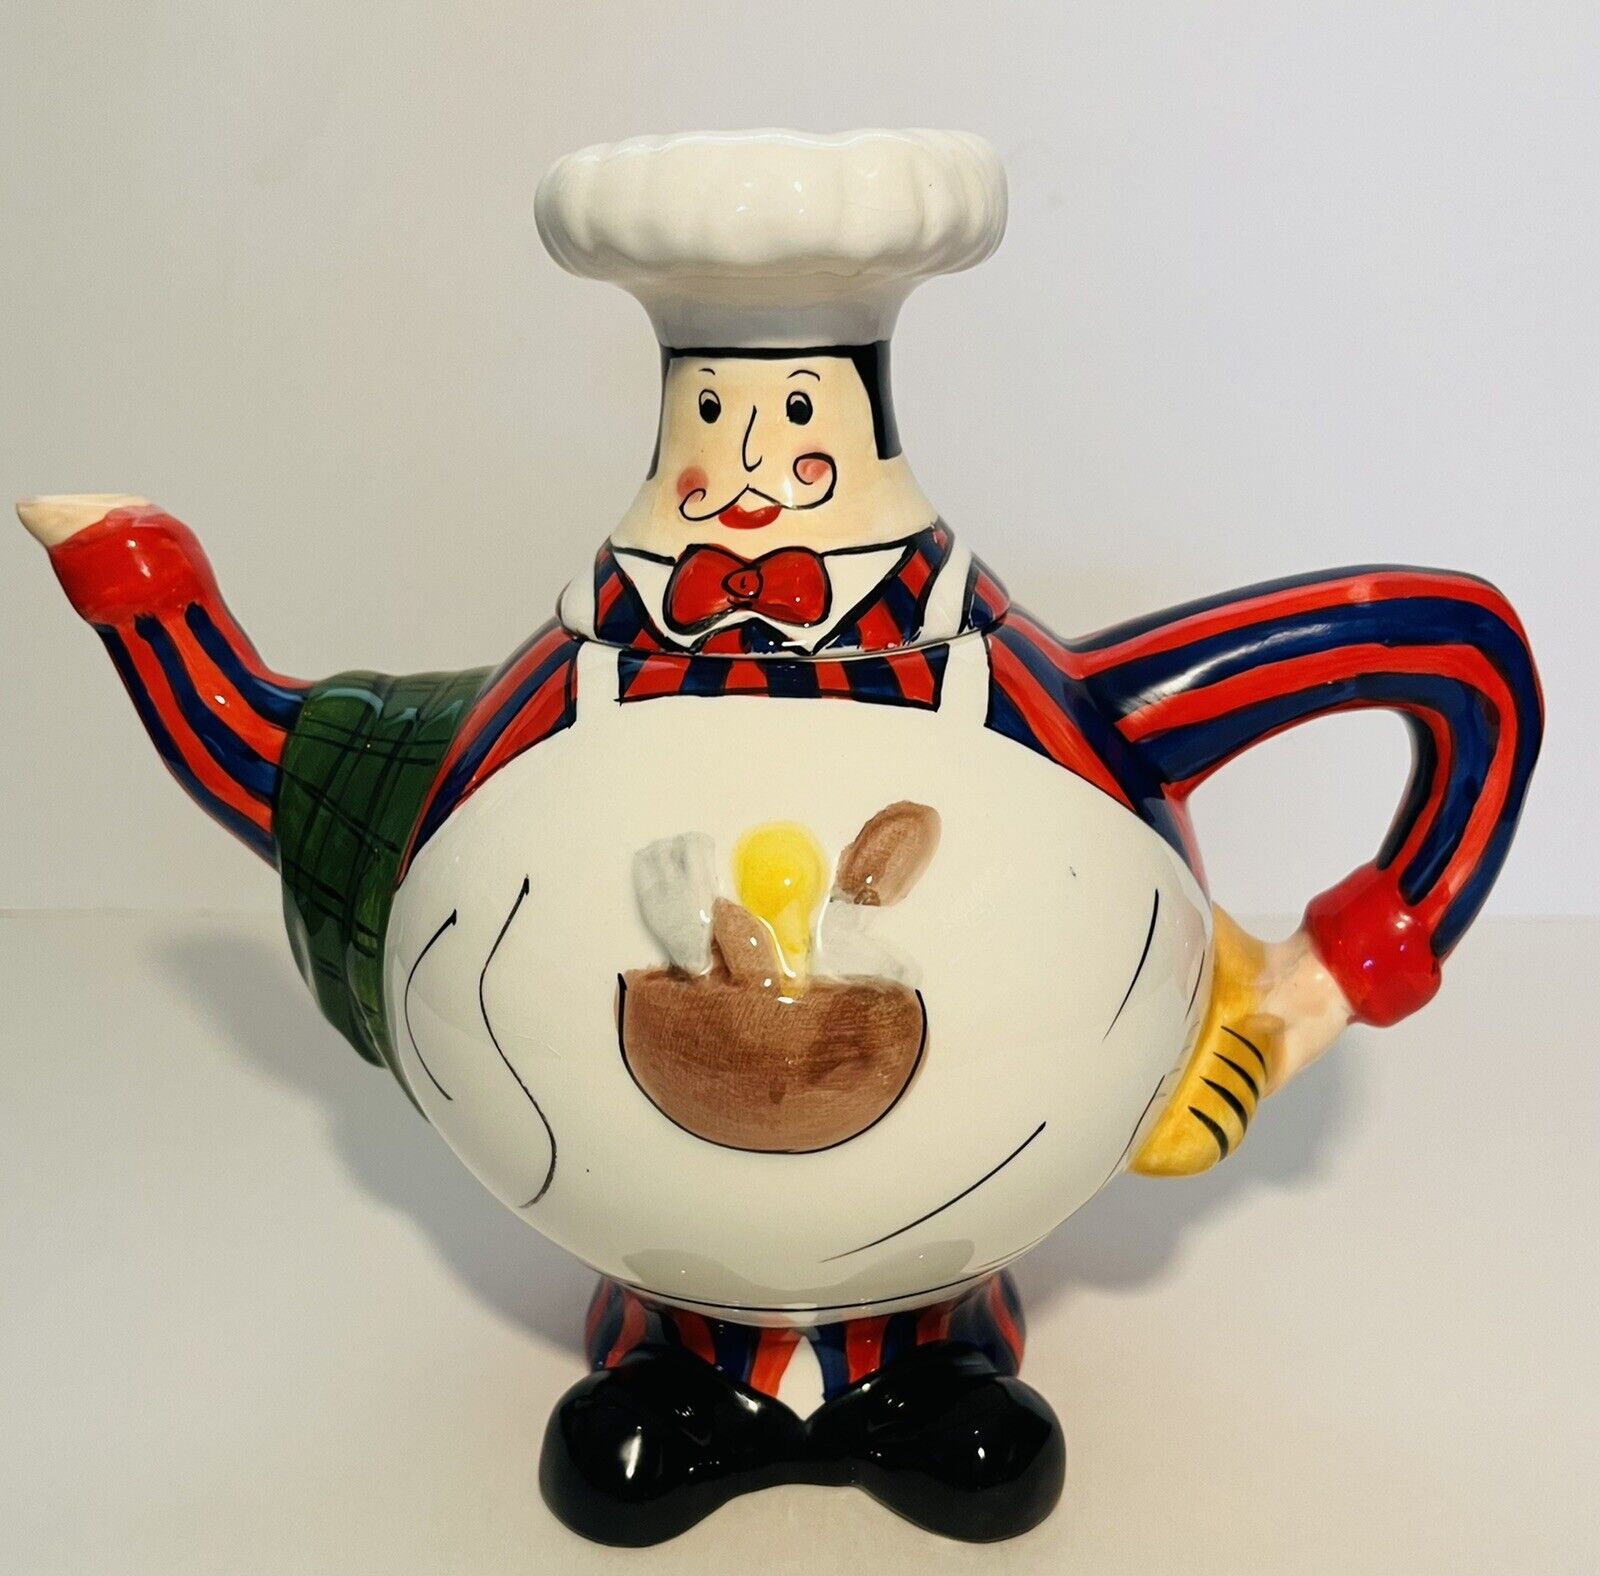 Vintage Trisa￼ Chubby Chef Ceramic Teapot Hand Painted Whimsical Italian Chef